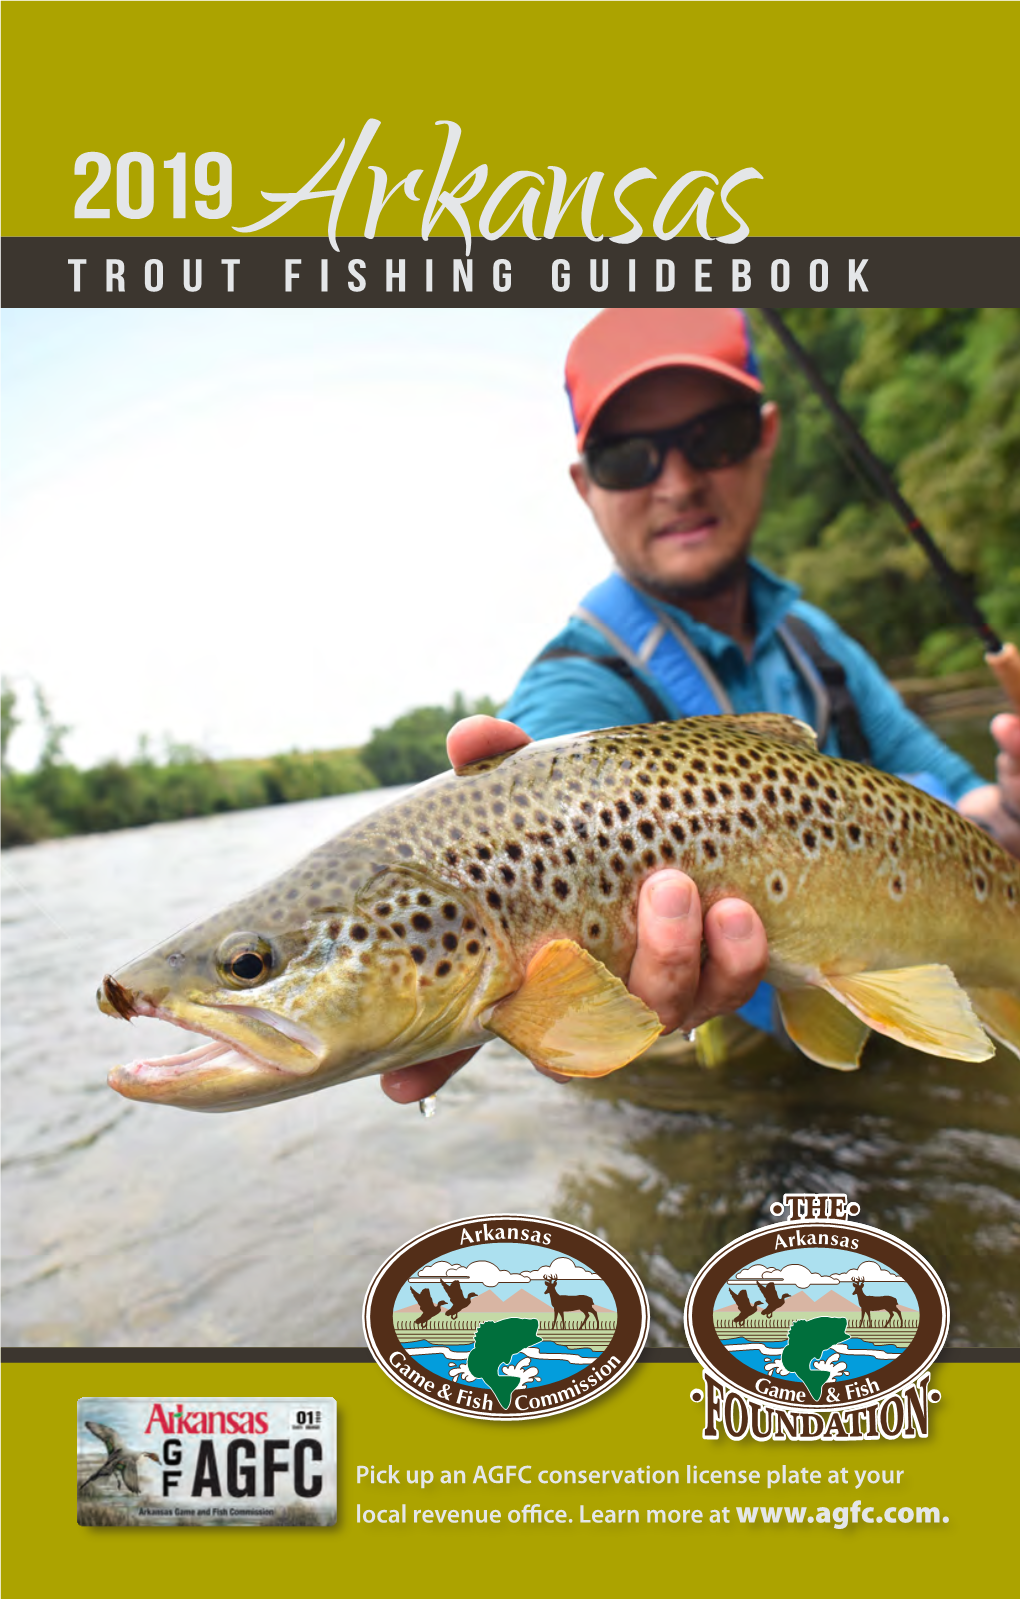 Trout Fishing Guidebook 2019 1 Arkansas Game and Fish Commission Commissioners Administration Categories Match Section Colors AGFC Contact Information